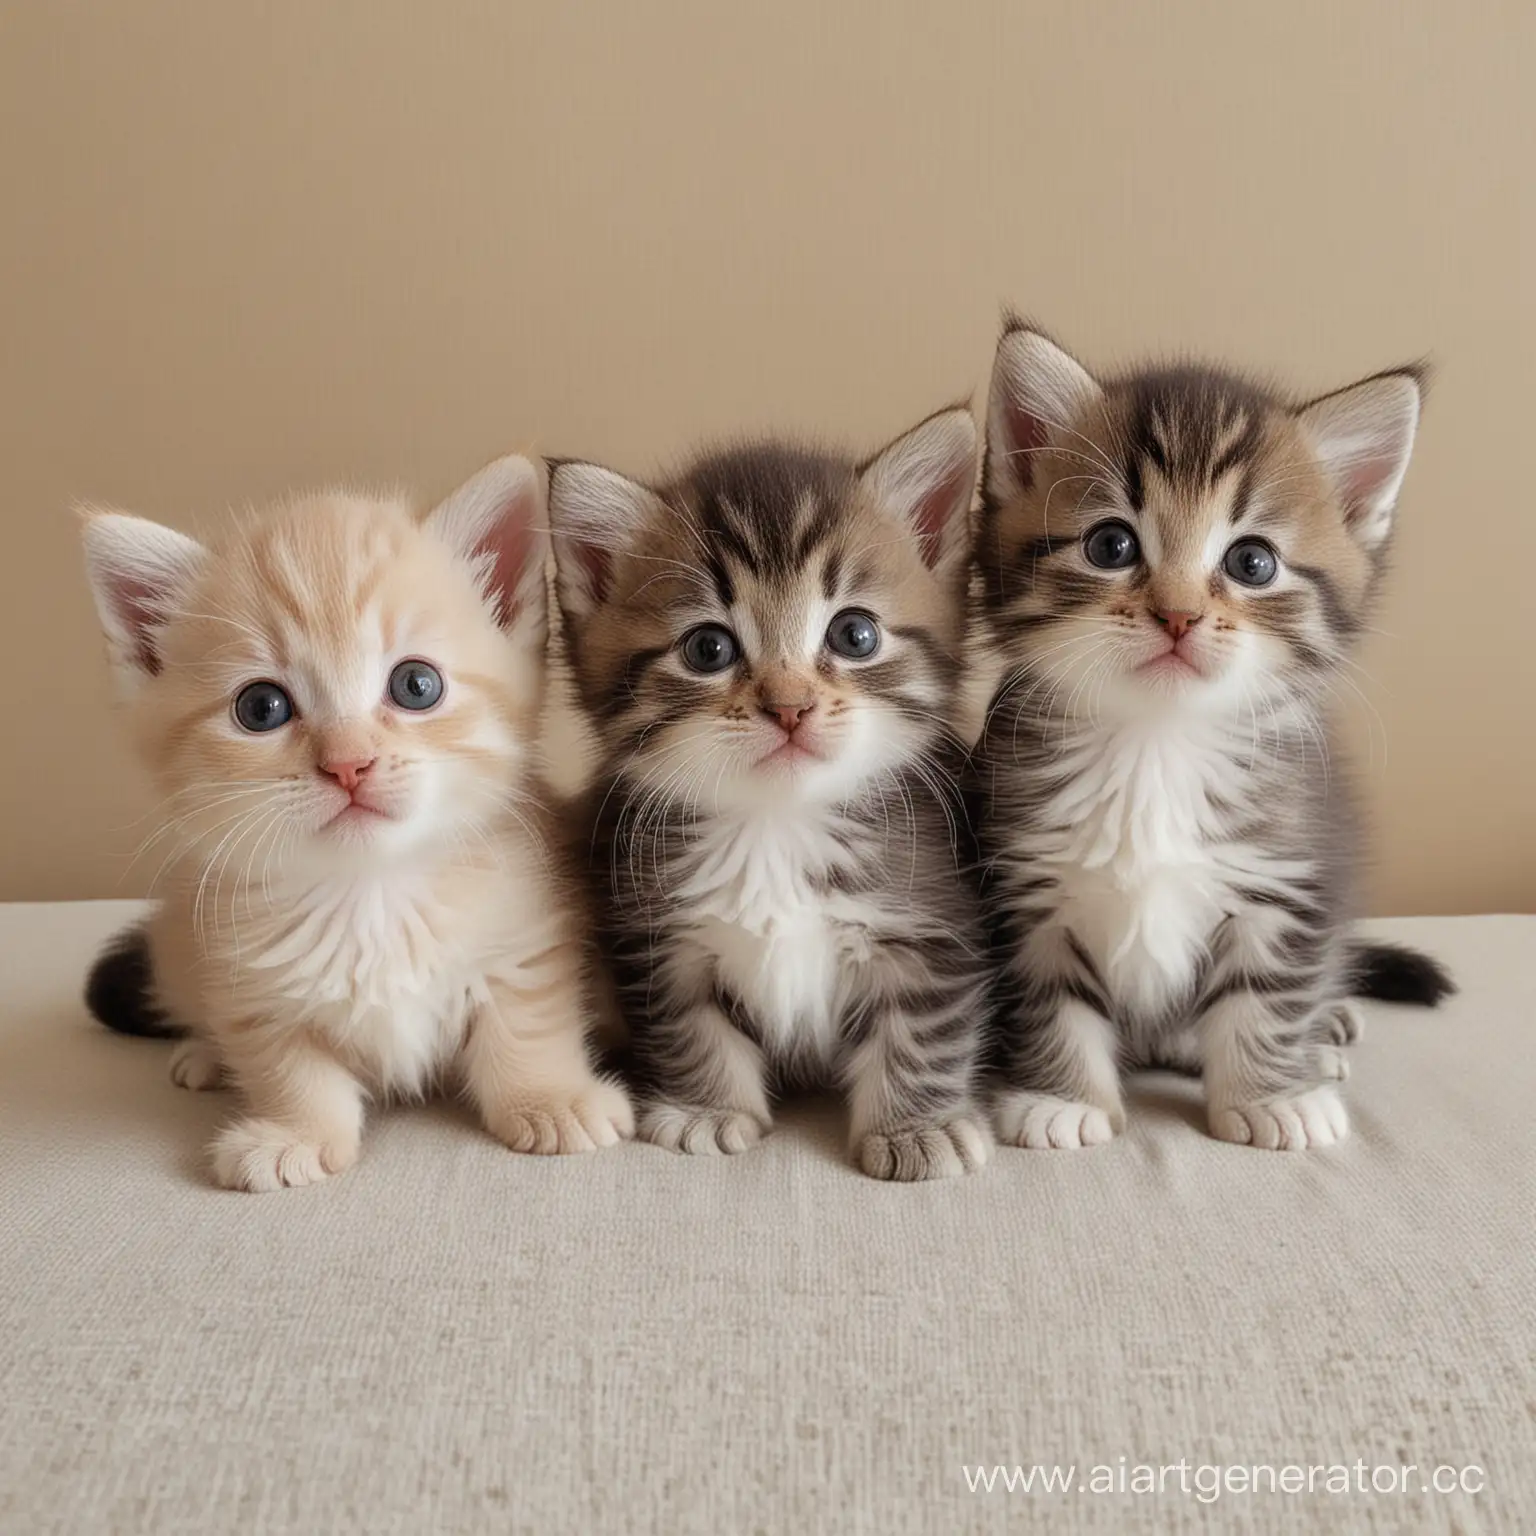 Adorable-Playful-Kittens-in-a-Cozy-Home-Environment